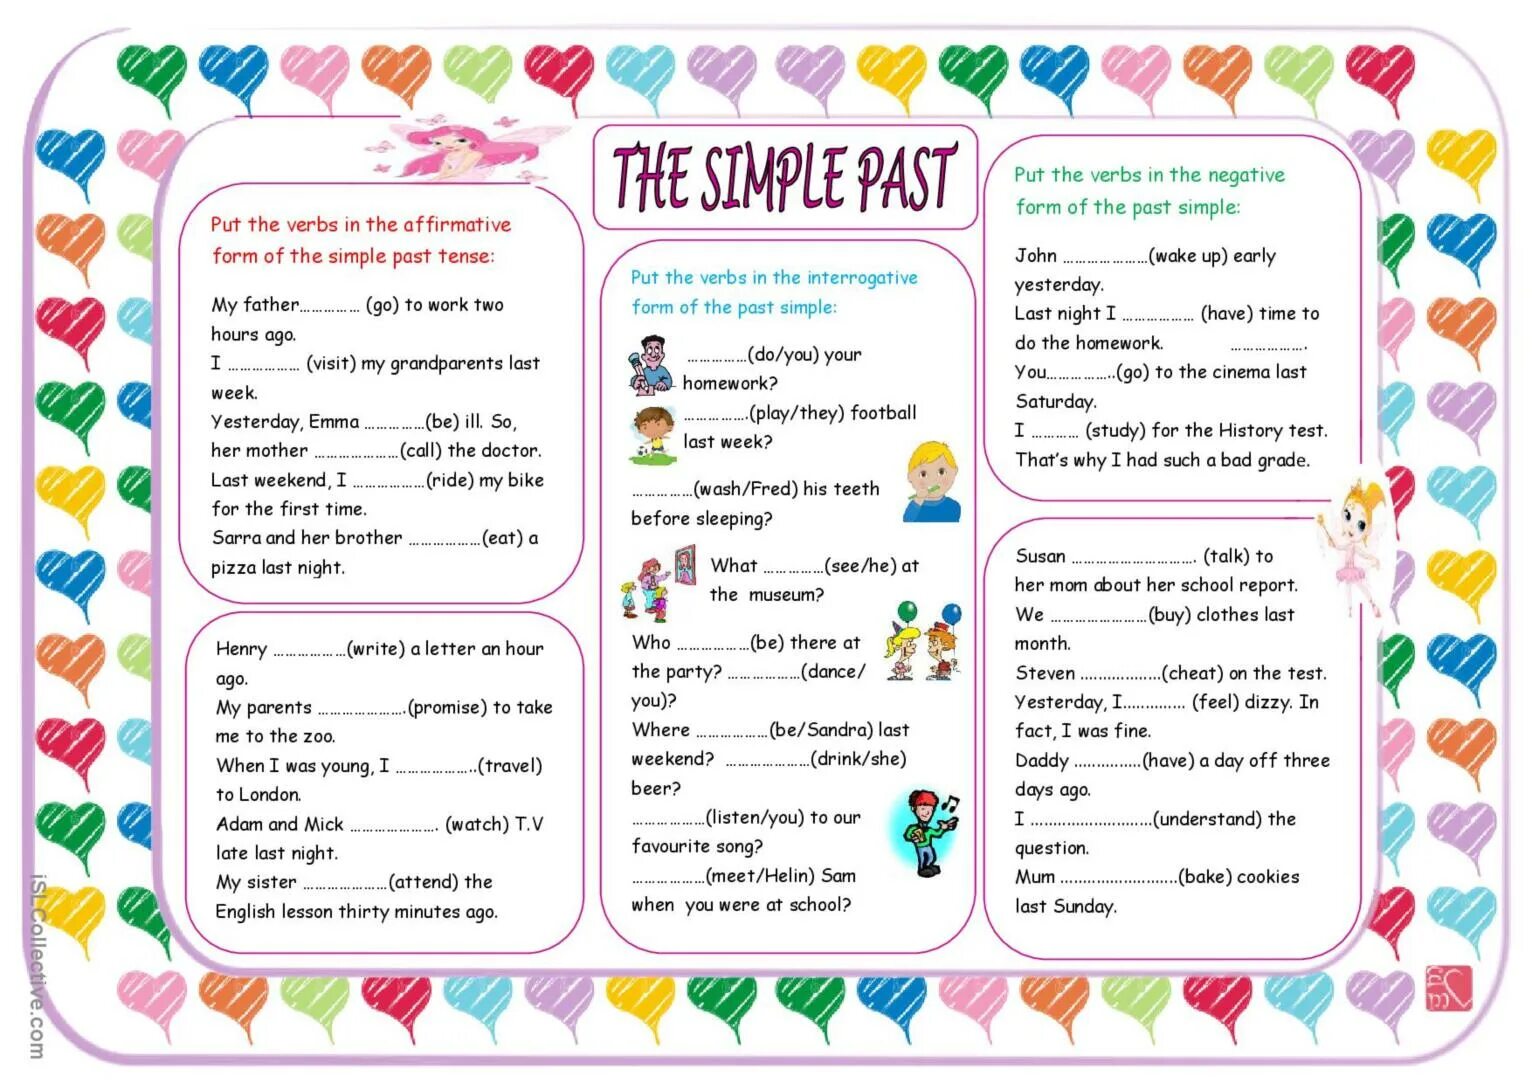 Regular questions. Past simple positive and negative Worksheets. Паст Симпл Worksheets. Past simple английский Worksheets. ESL past simple Worksheets.